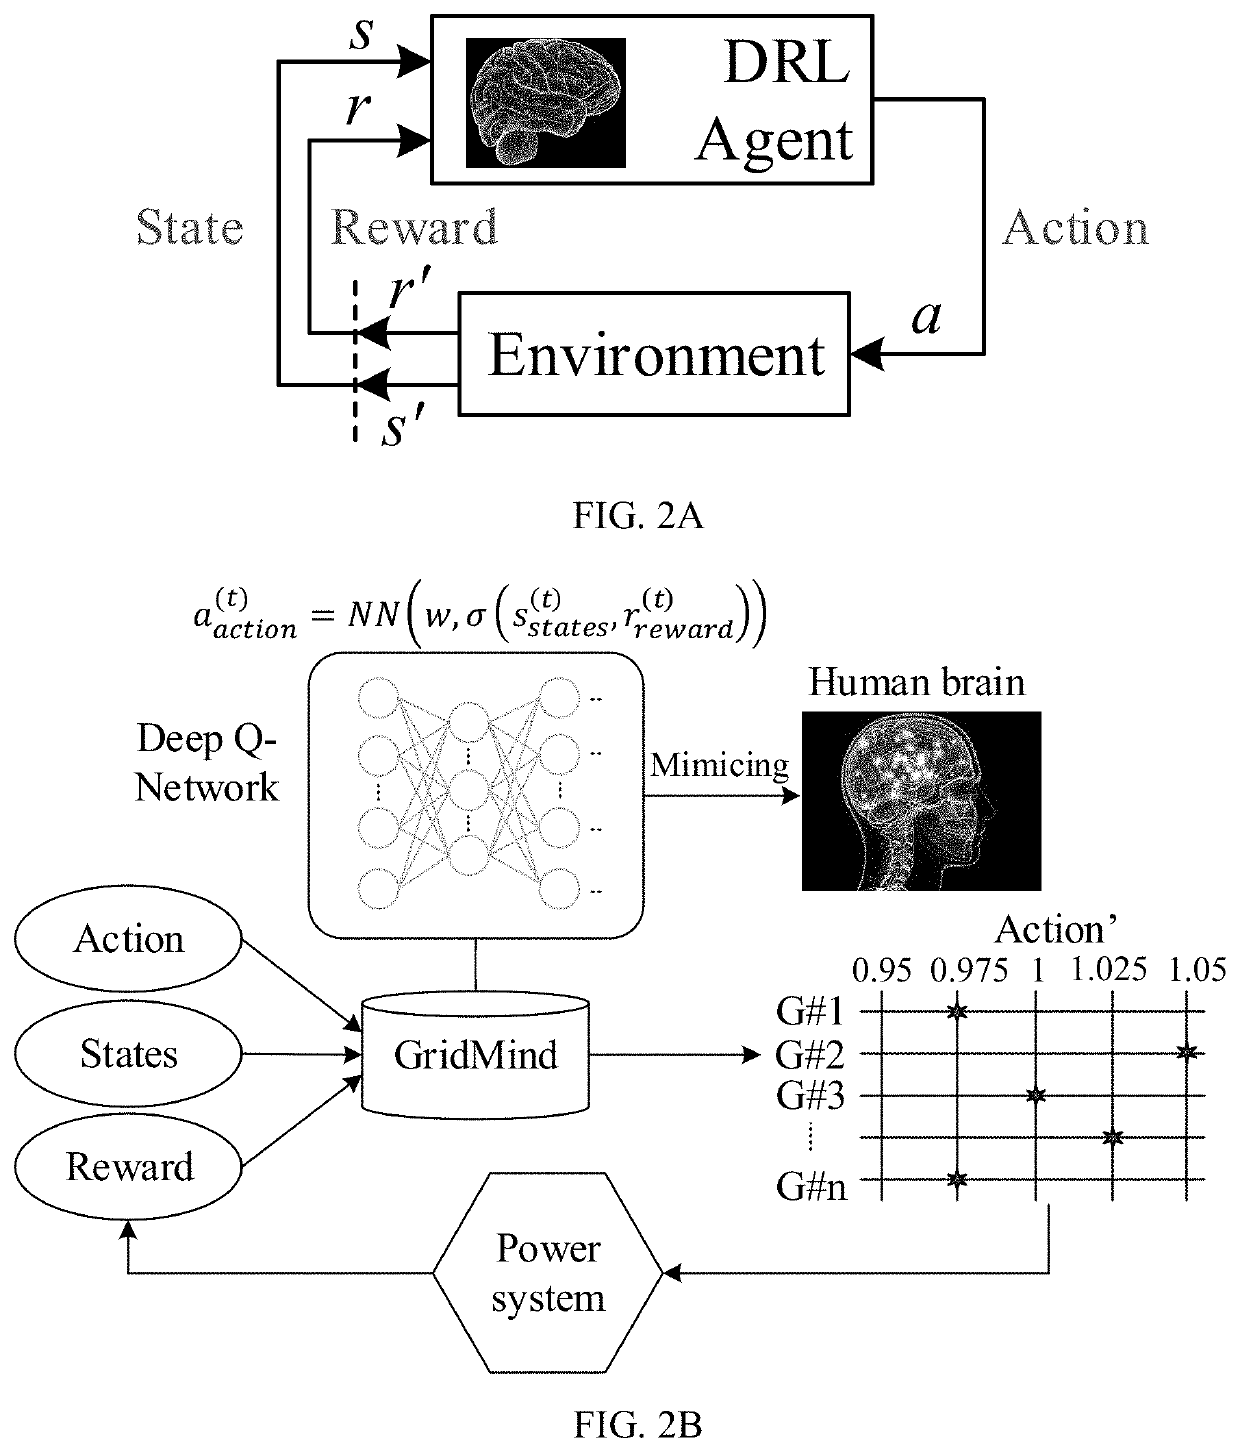 Autonomous Voltage Control for Power System Using Deep Reinforcement Learning Considering N-1 Contingency